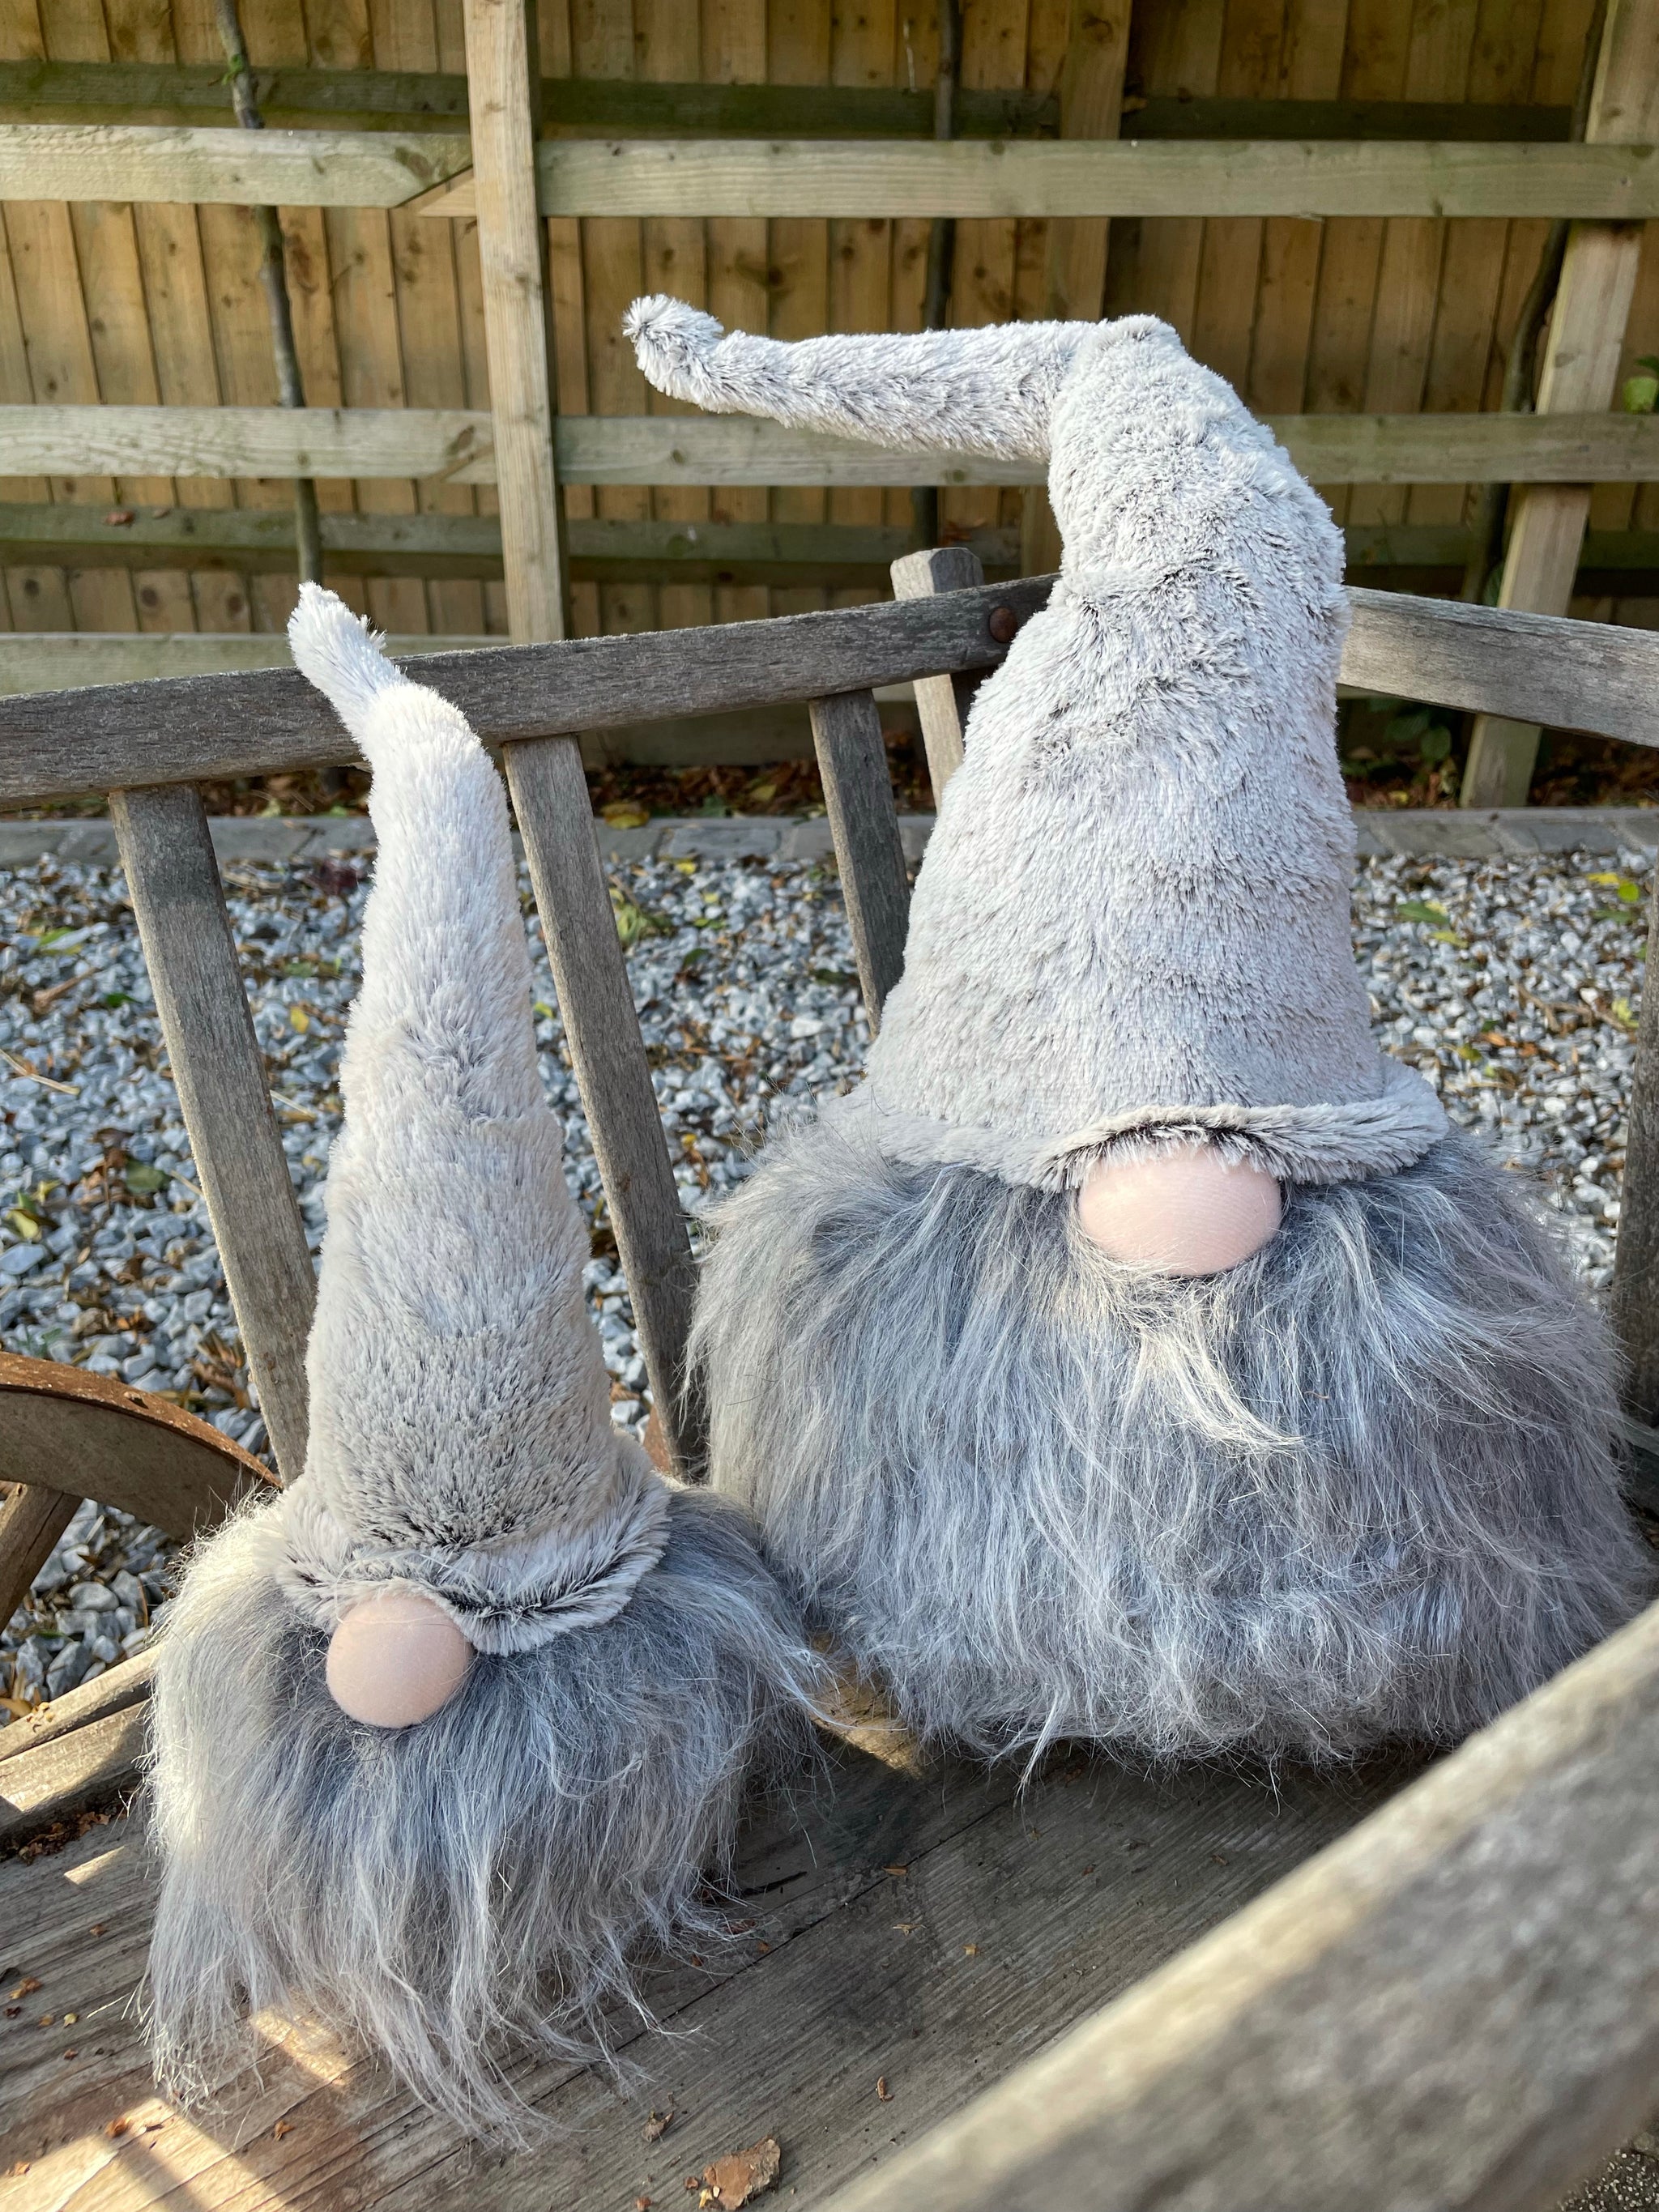 Grey Bearded Gonk with Grey Fur Hat - 2 Sizes